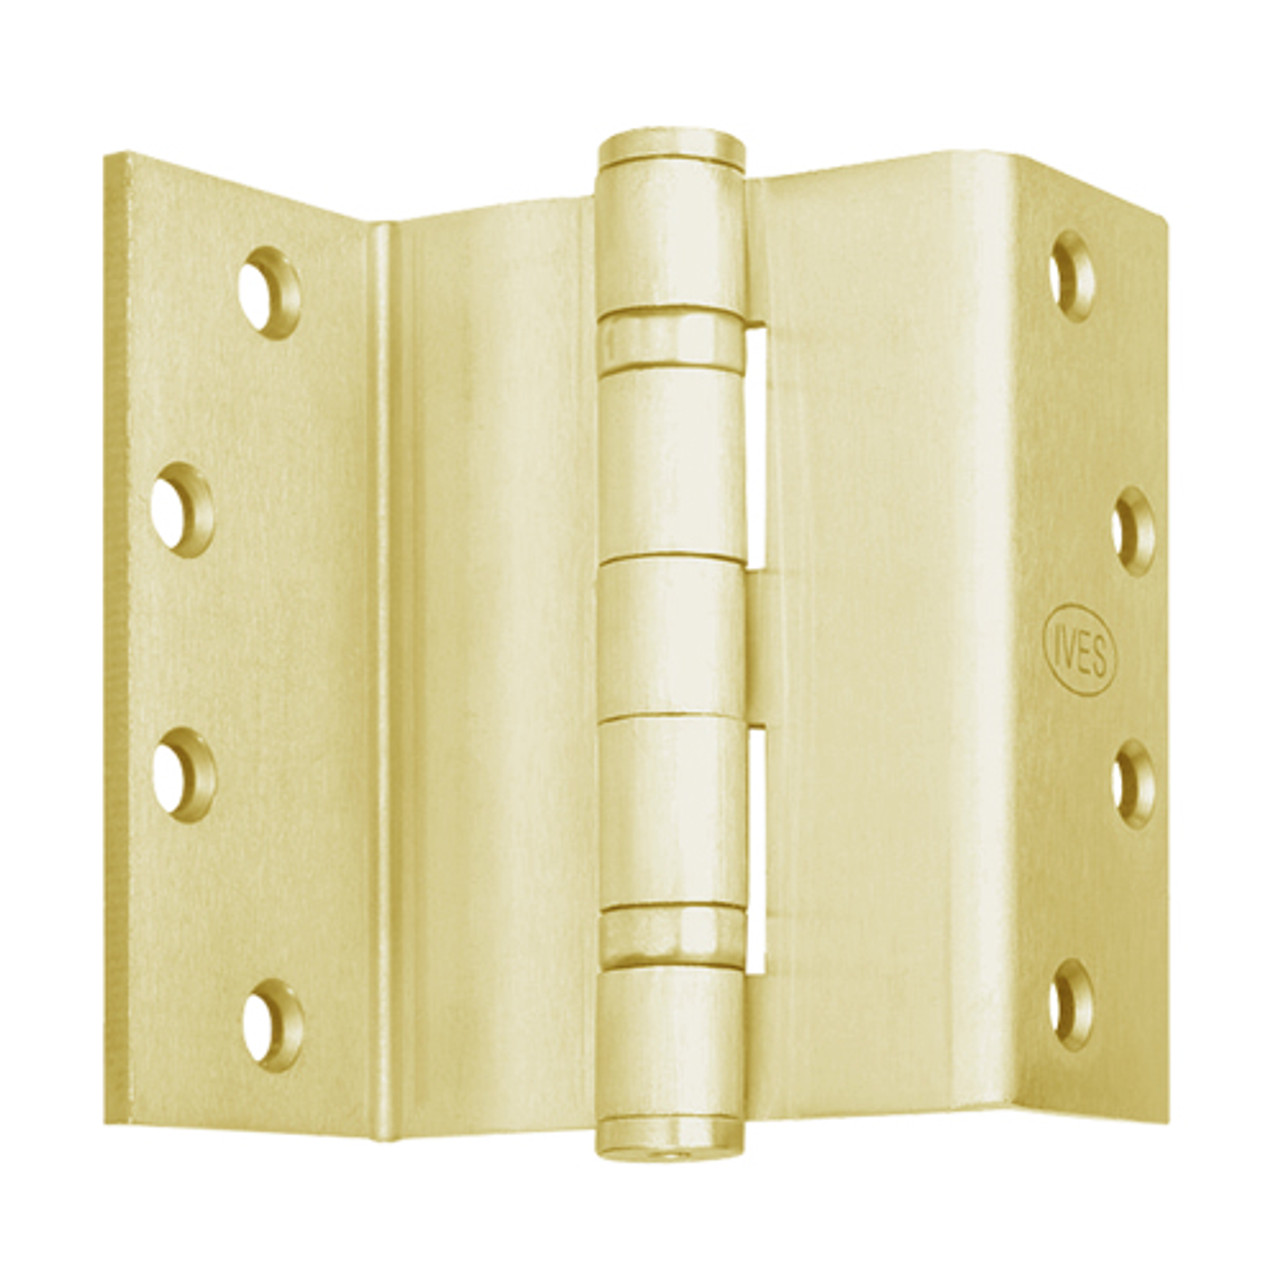 5BB1SC-5-633 IVES 5 Knuckle Ball Bearing Swing Clear Full Mortise Hinge in Satin Brass Plated